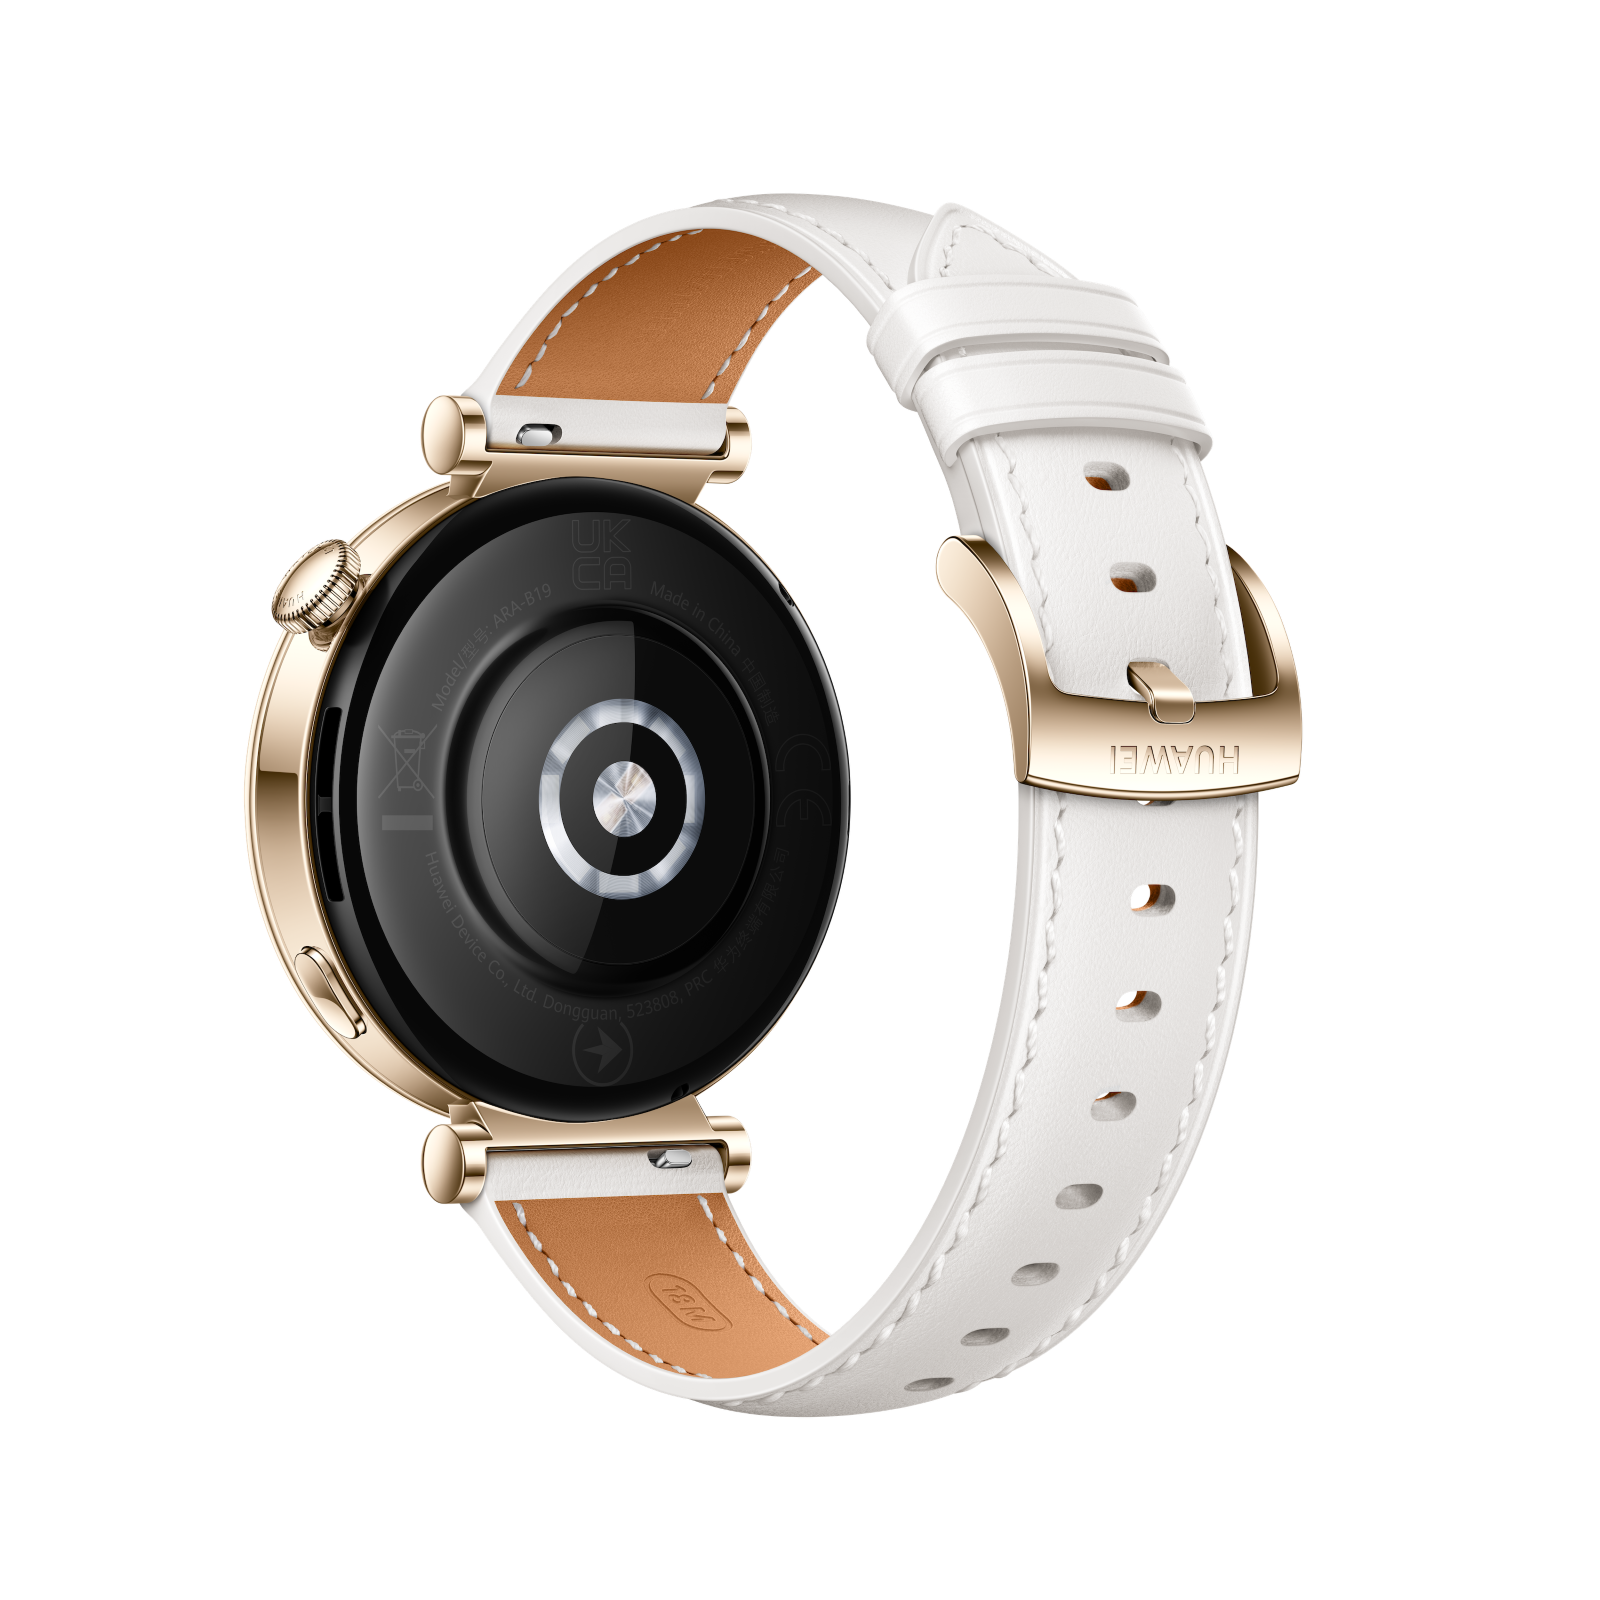 HUAWEI WATCH GT 4, il test completo - 4ActionSport